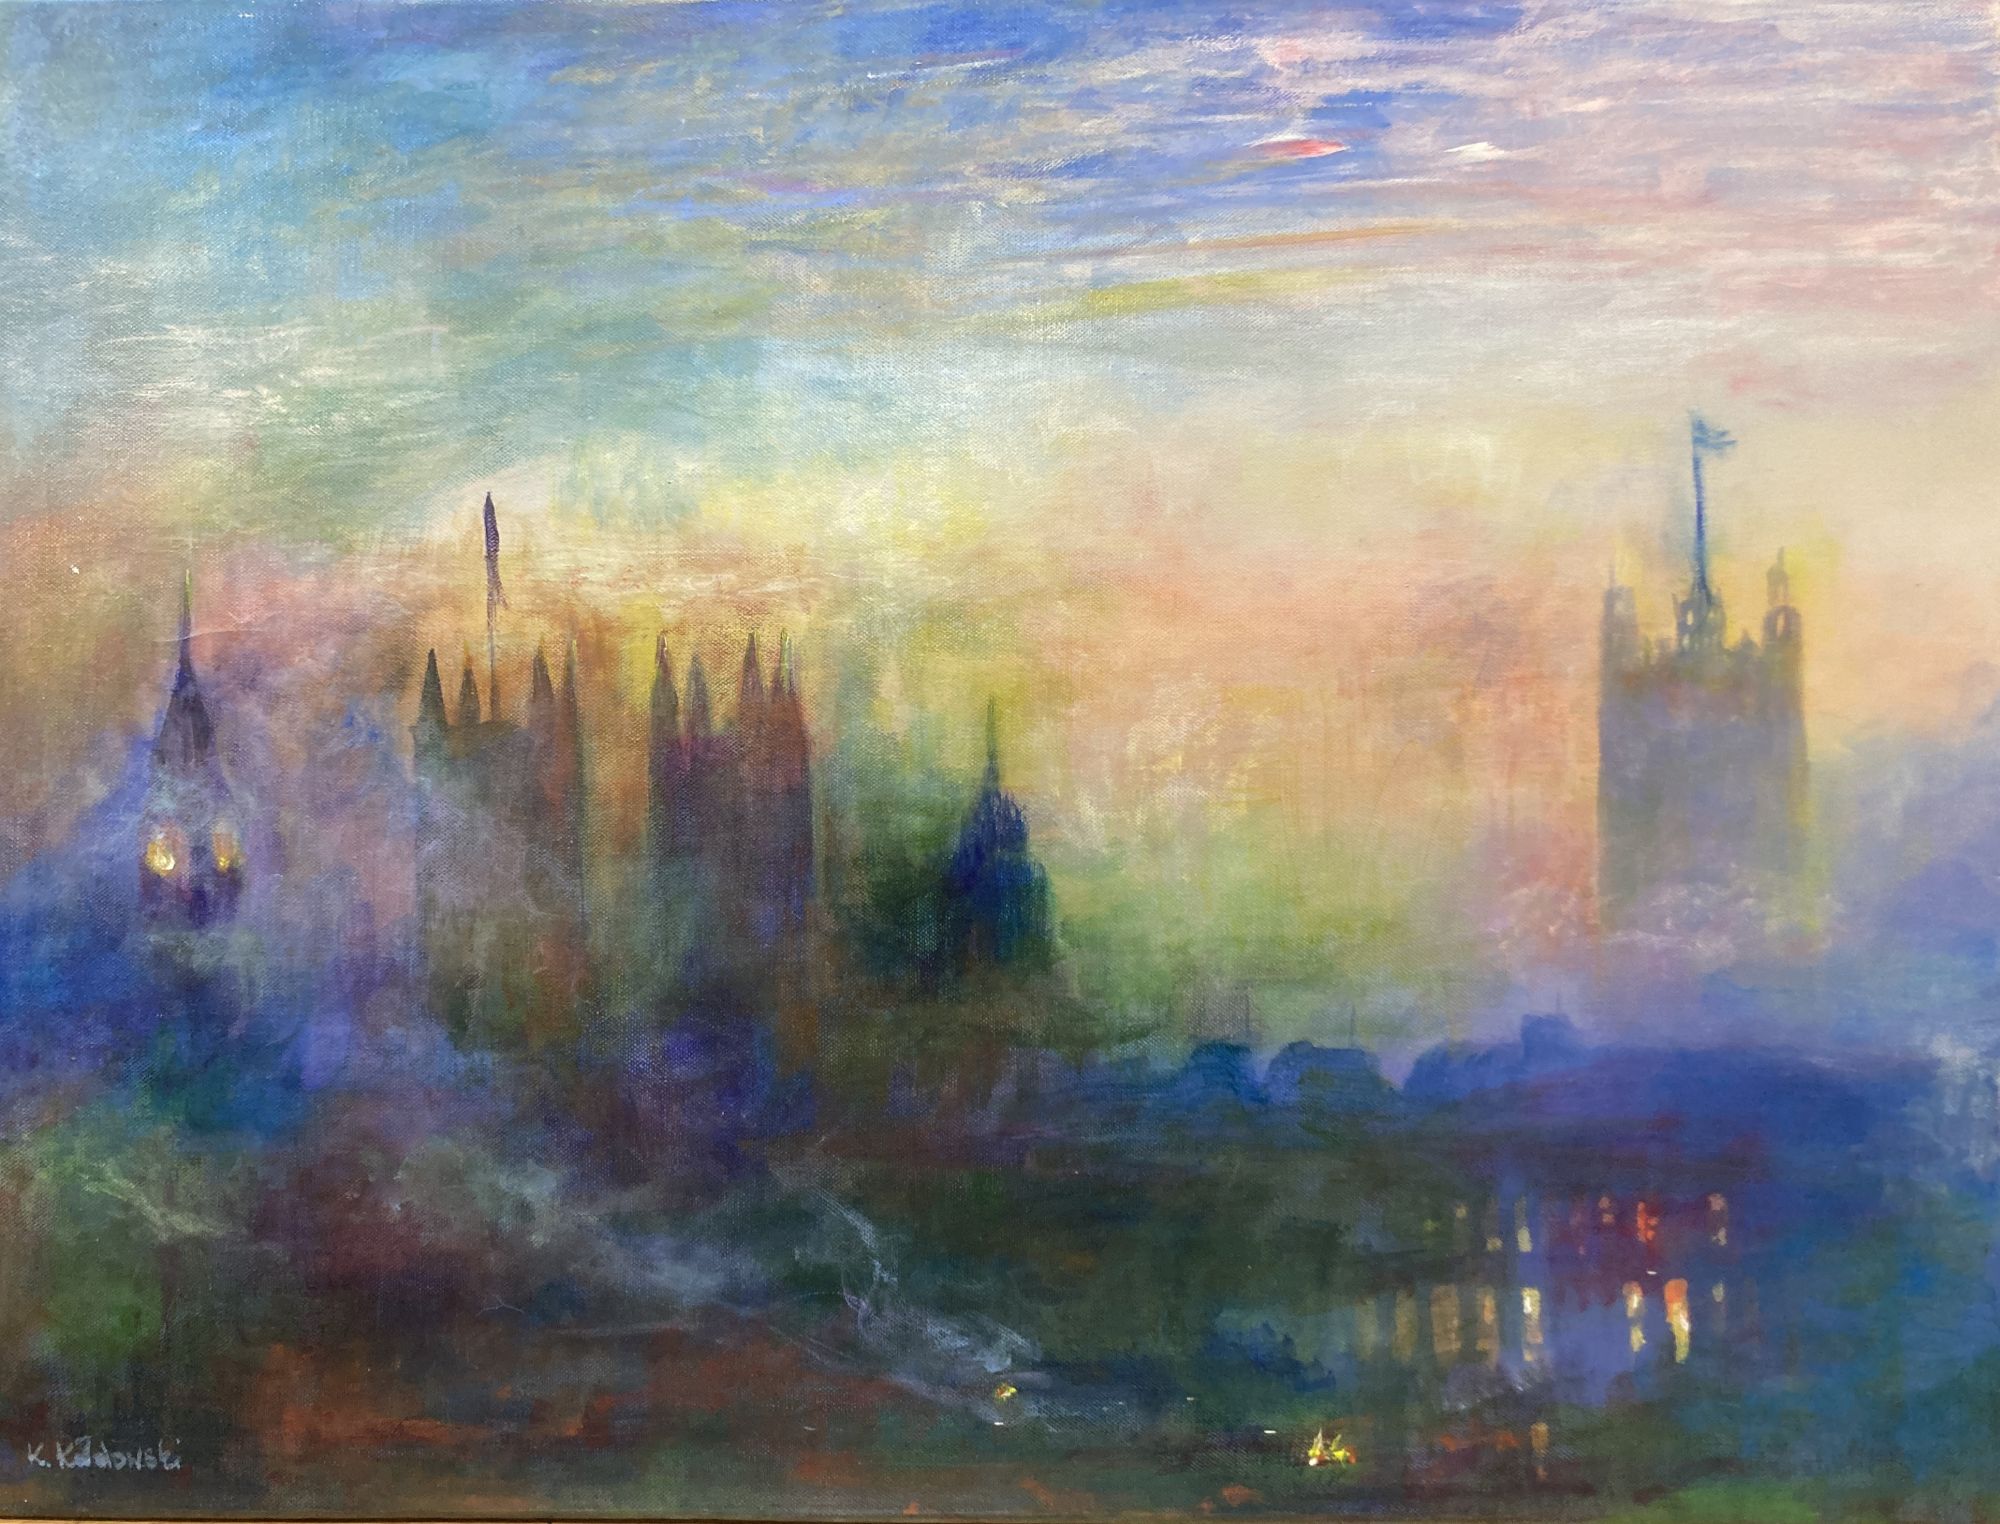 Koldowski, oil on canvas, View of the Houses of Parliament, signed and dated 05, 60 x 80cm, unframed